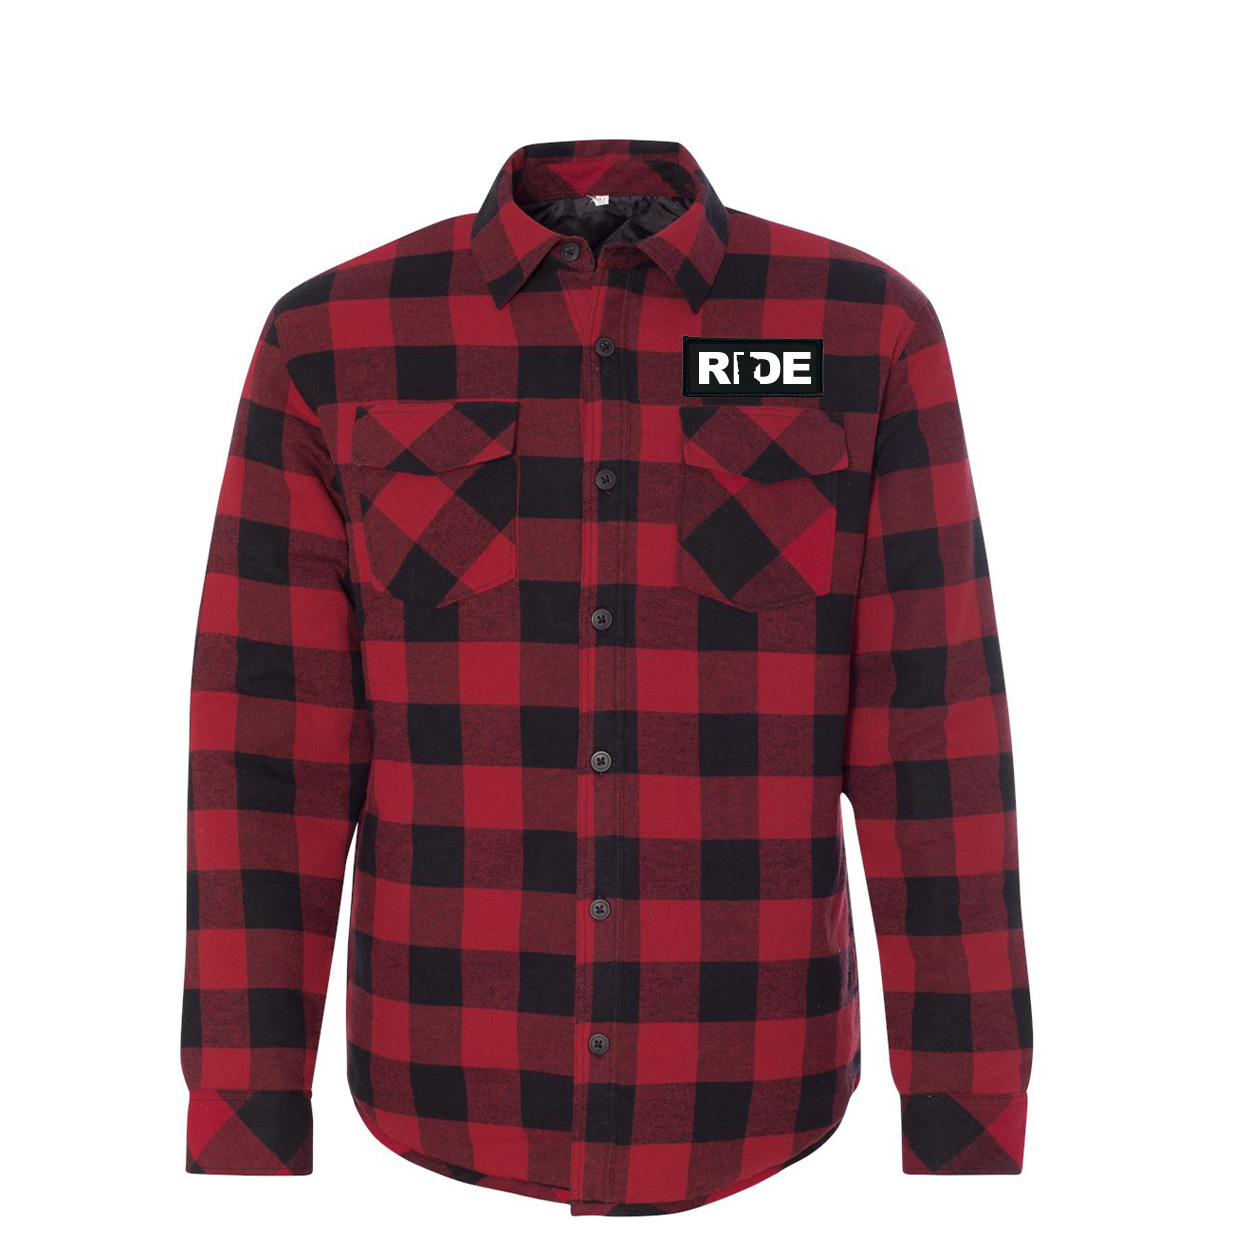 Ride Minnesota Classic Unisex Woven Patch Quilted Button Flannel Jacket Red/Black Buffalo (White Logo)